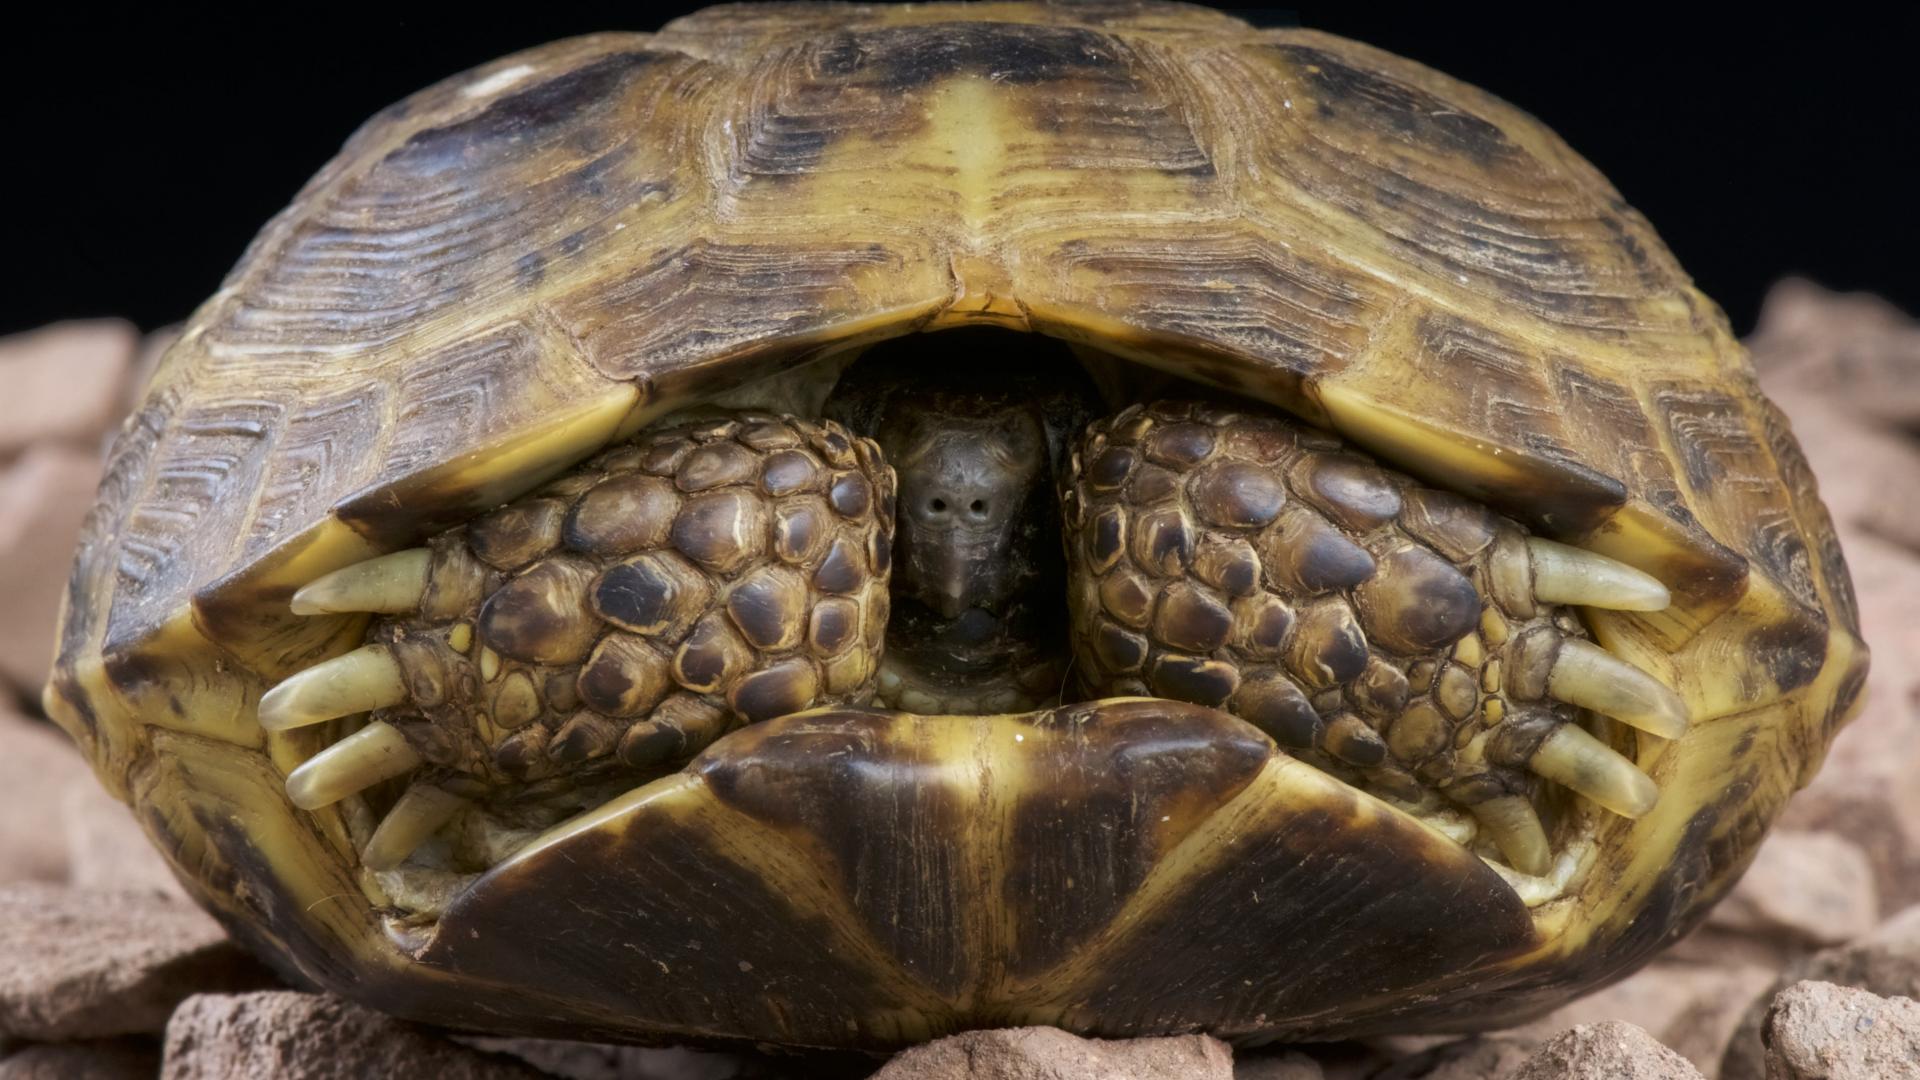 Tortue des steppes (Agrionemys horsfieldii) dans sa carapace